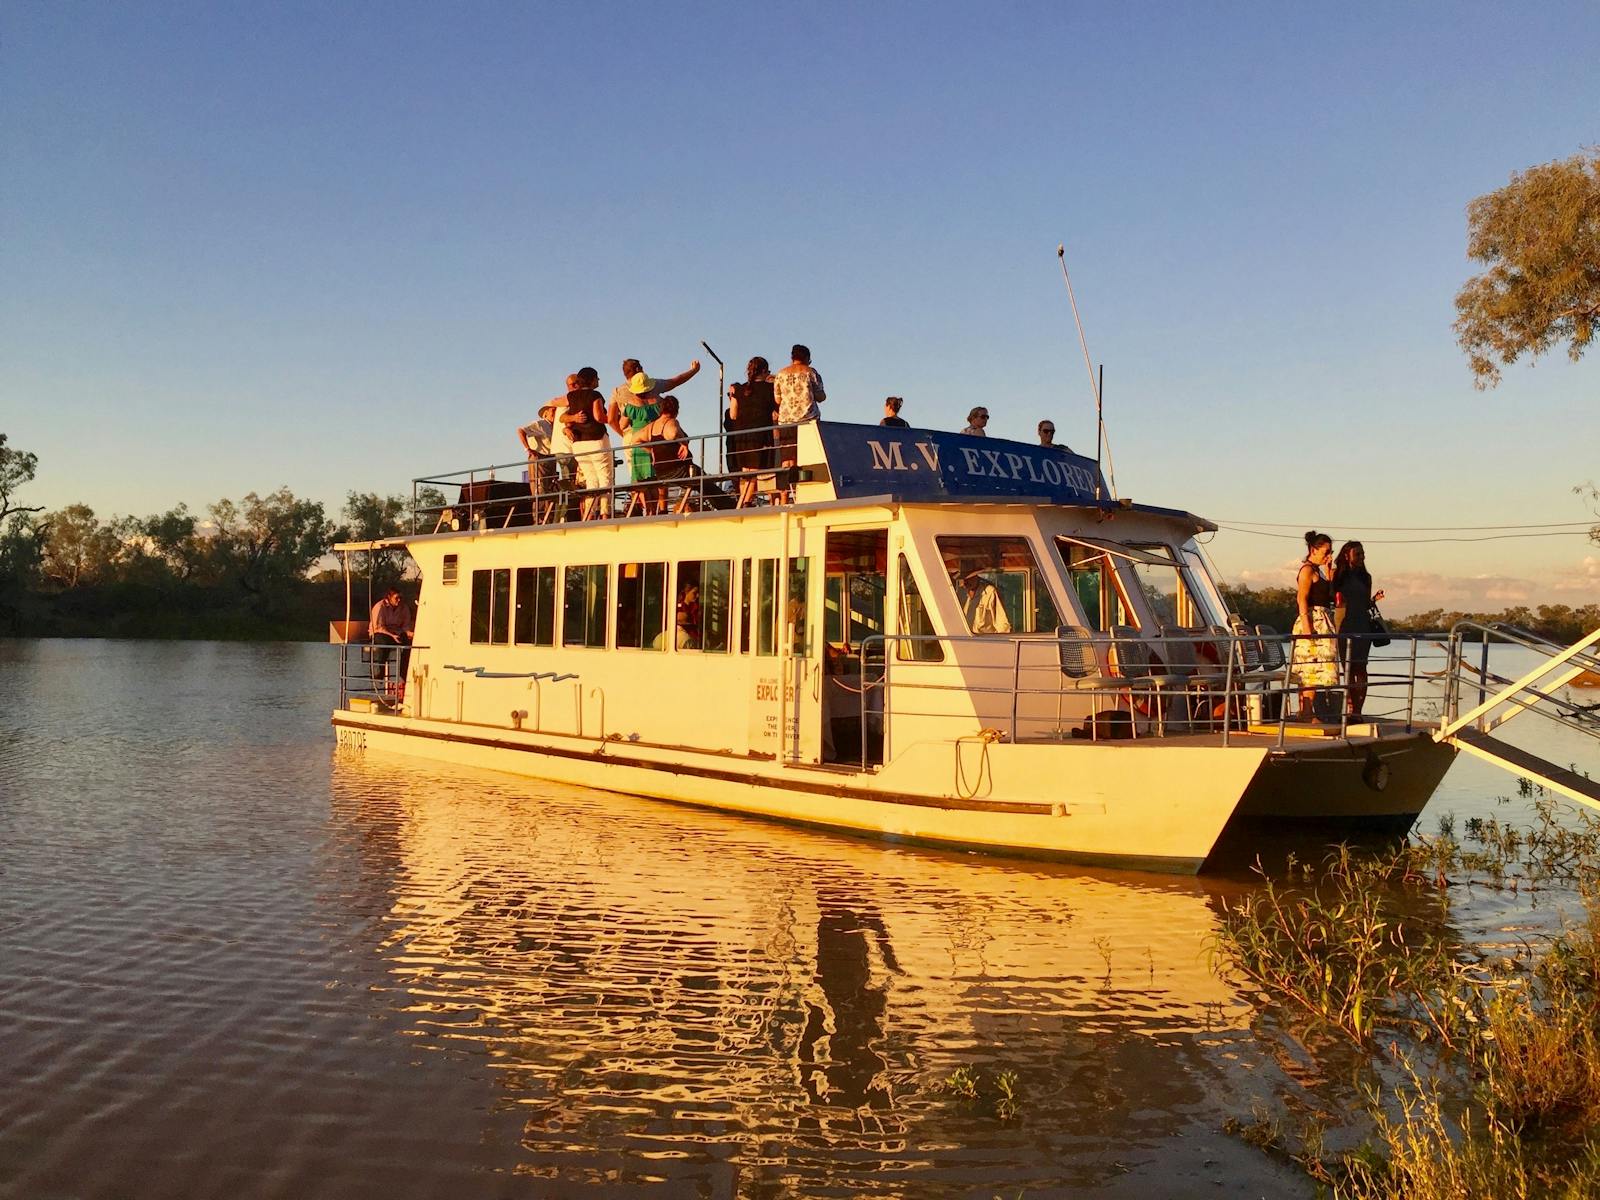 Smithy's Sunset Cruise guests onboard